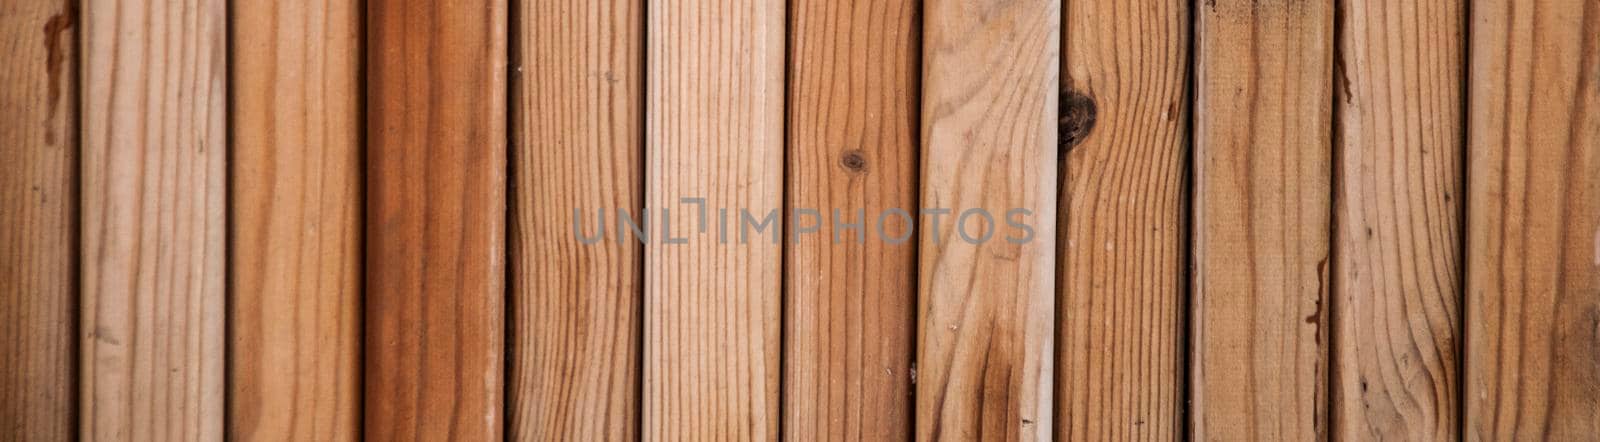 pine wood plank texture and background by inxti